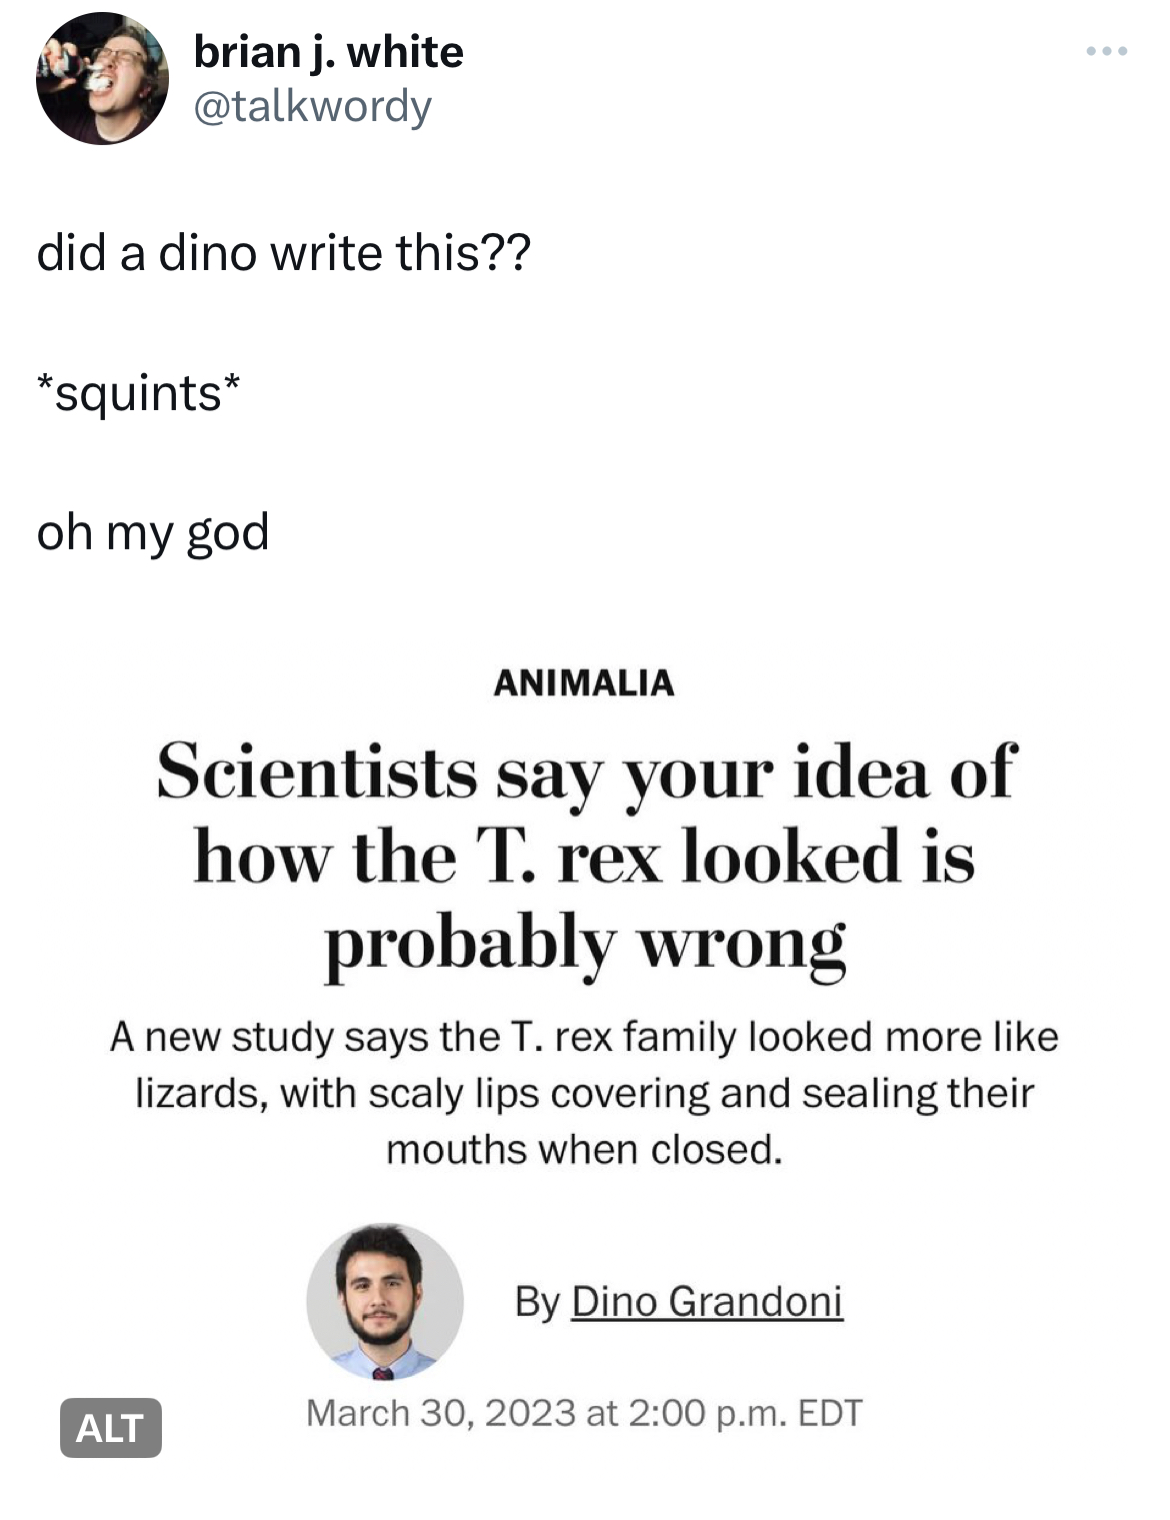 Tweets of the week - time to say goodbye noten - brian j. white did a dino write this?? squints oh my god Animalia Scientists say your idea of how the T. rex looked is probably wrong A new study says the T. rex family looked more lizards, with scaly lips 